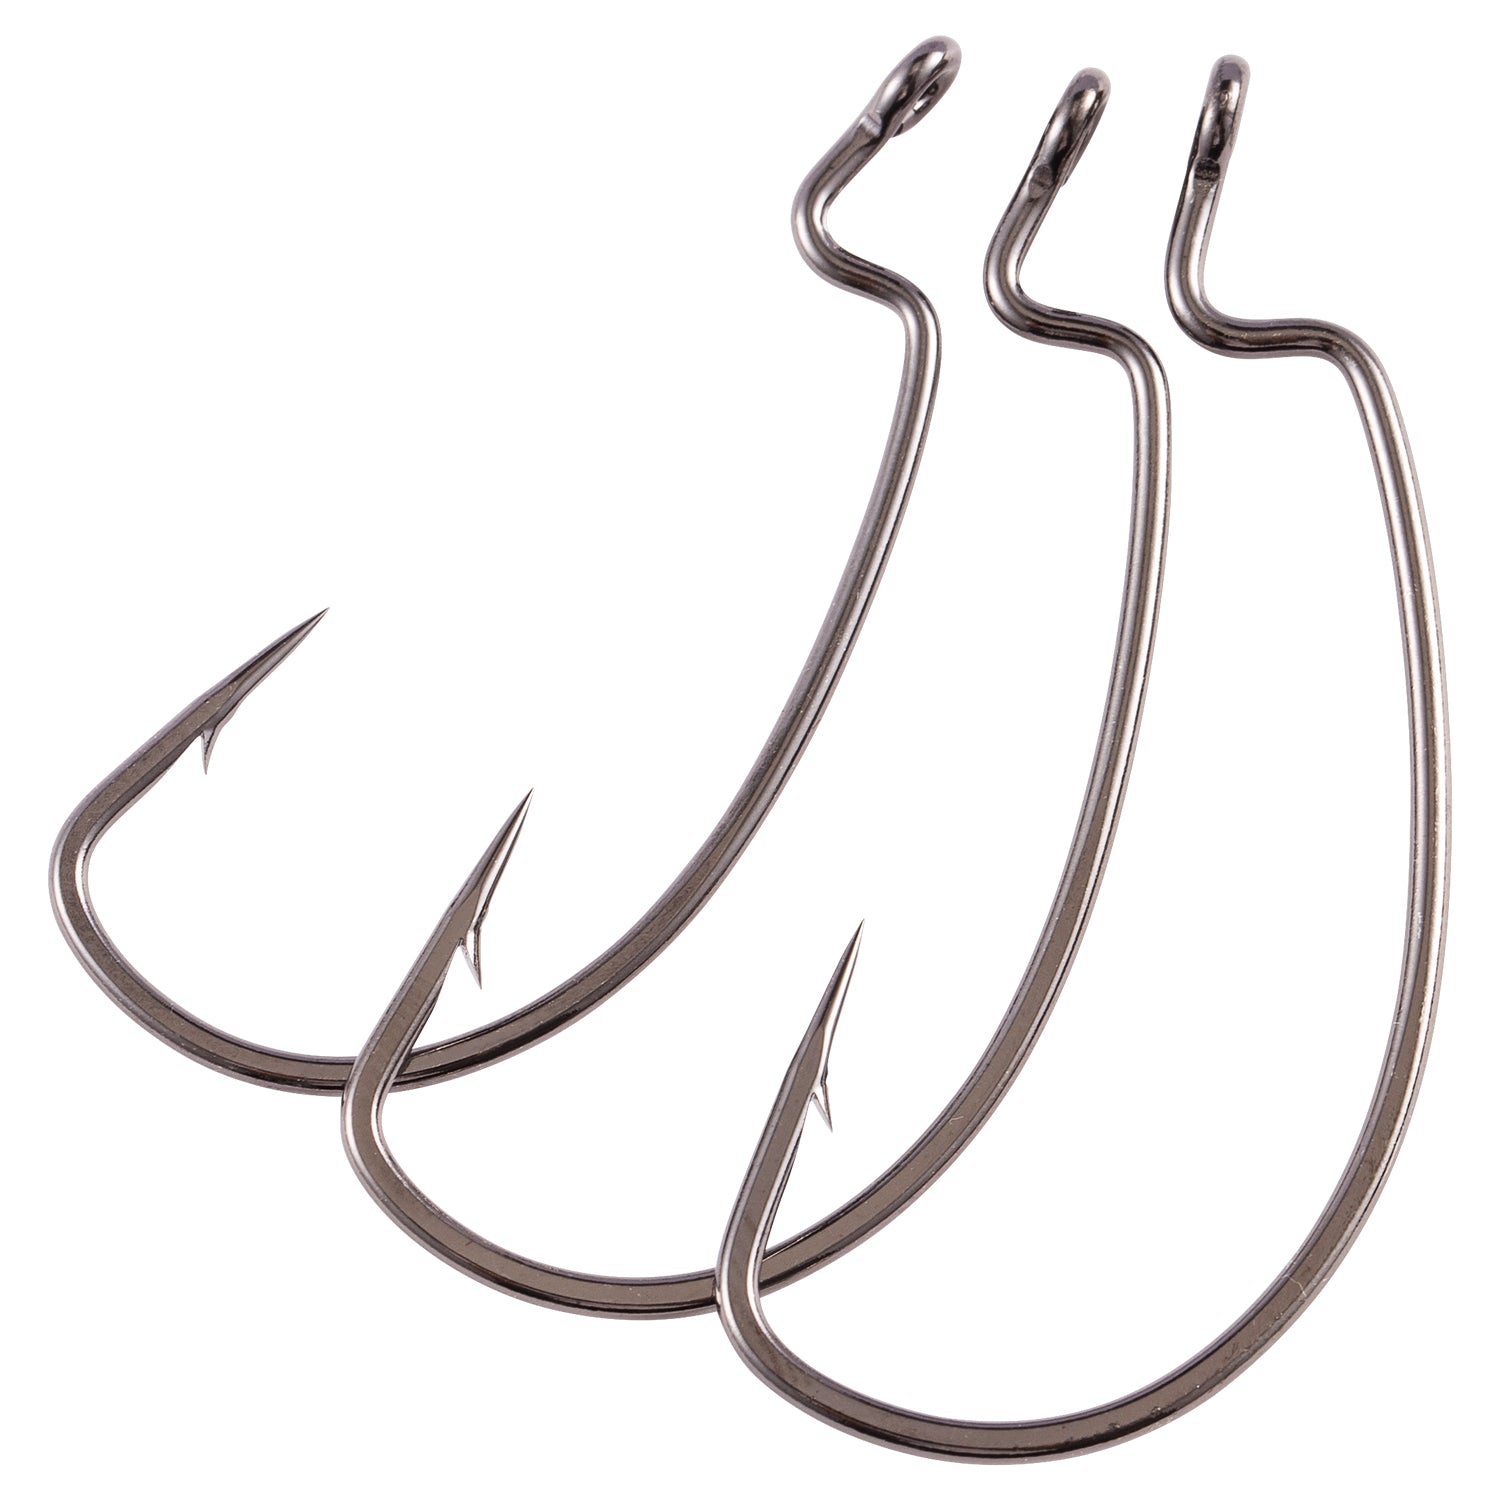 pvc fishing hooks, pvc fishing hooks Suppliers and Manufacturers